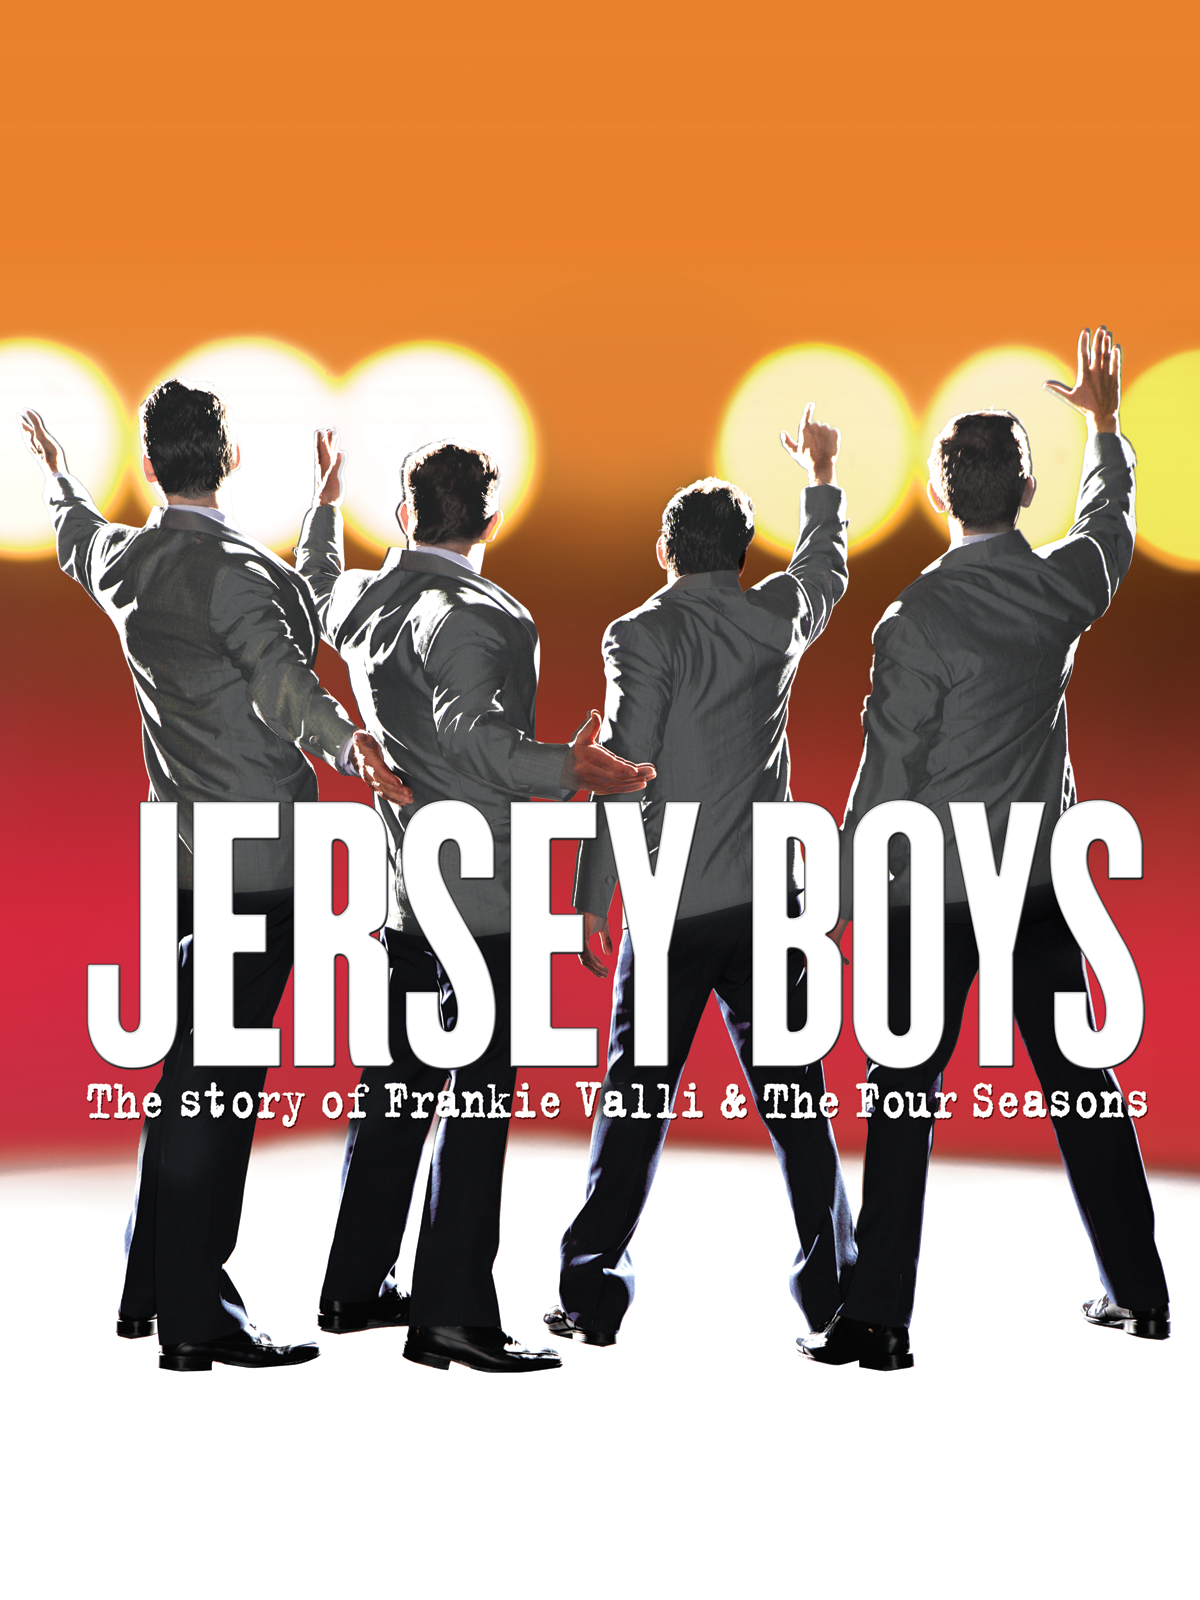 ../dist/images/Jersey-Boys-poster.png